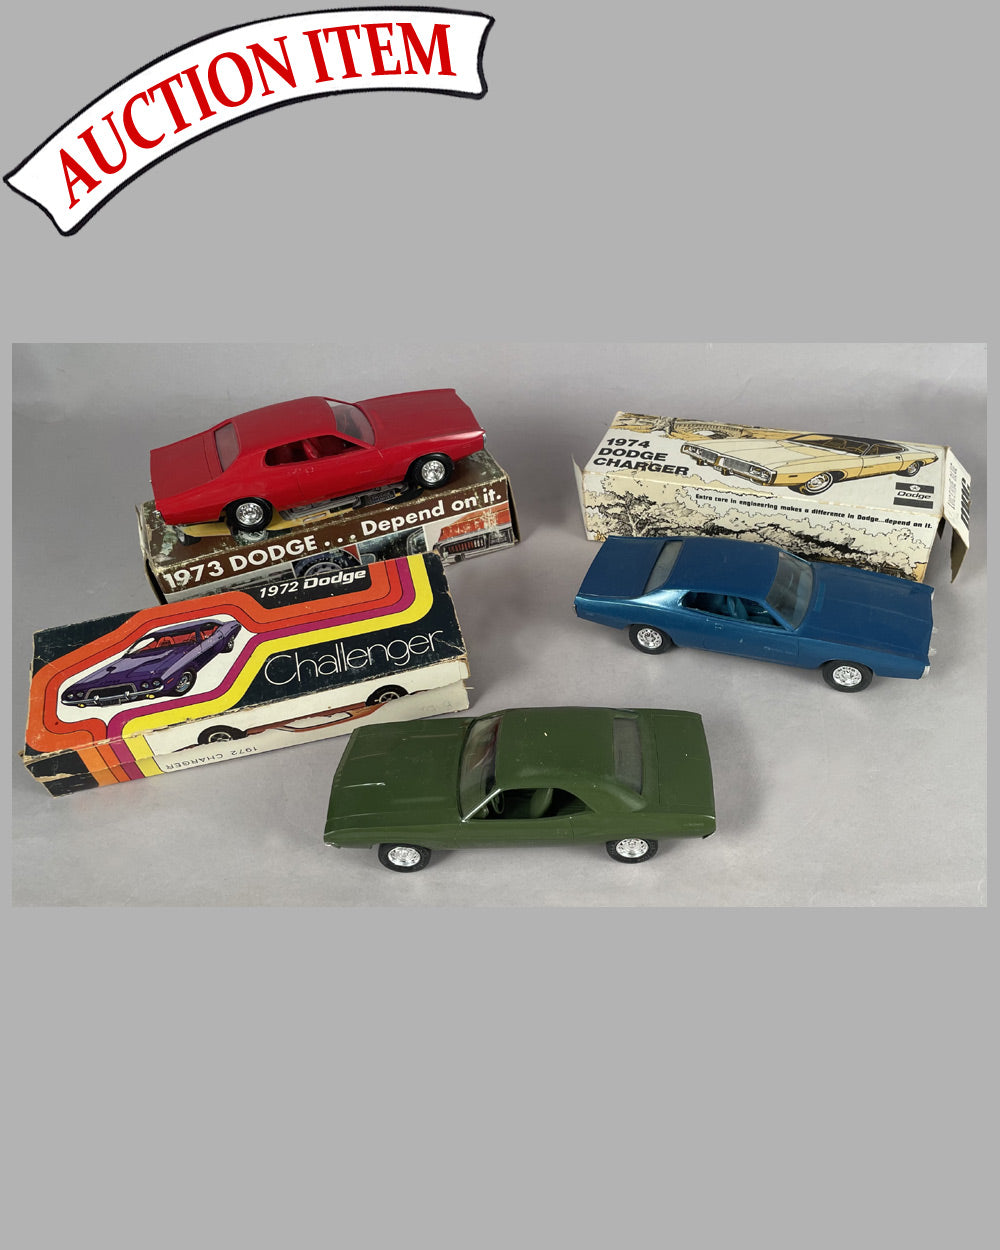 Collection of 3 Dodge Charger promotional models, 1972, 1973 and 1974